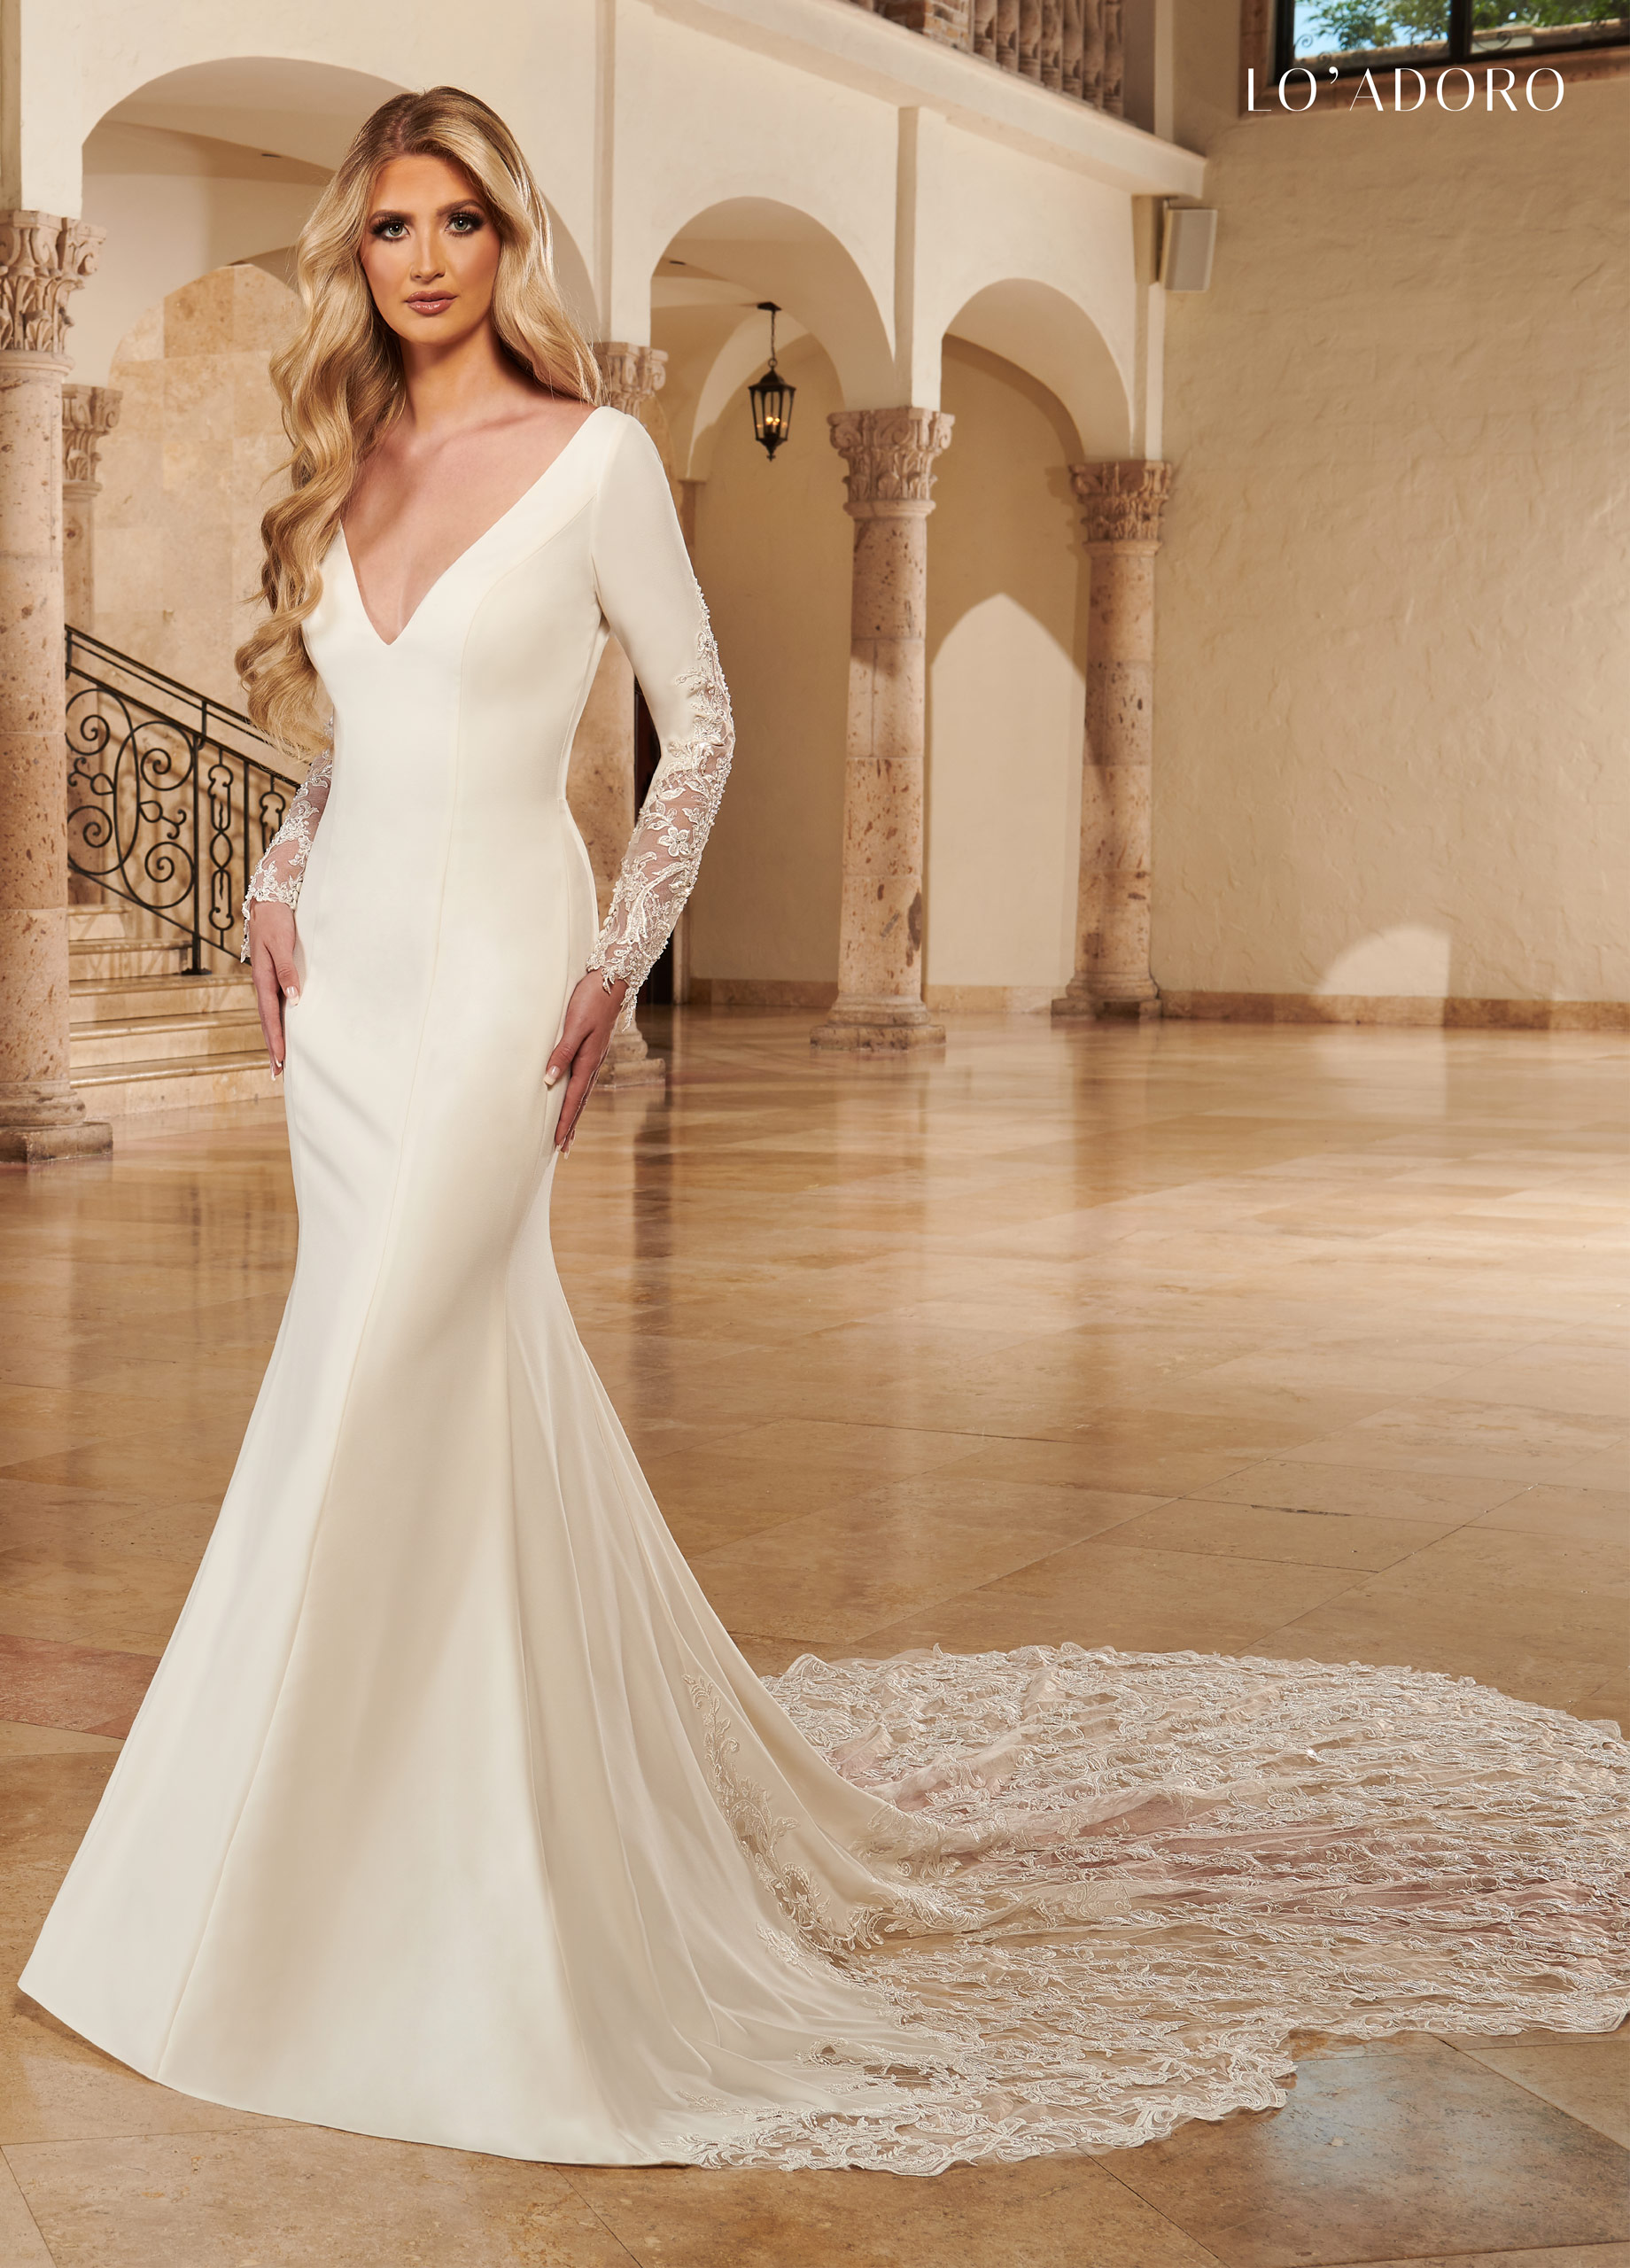 V-Neck Fitted Long Lo' Adoro Bridal in Ivory,White Color